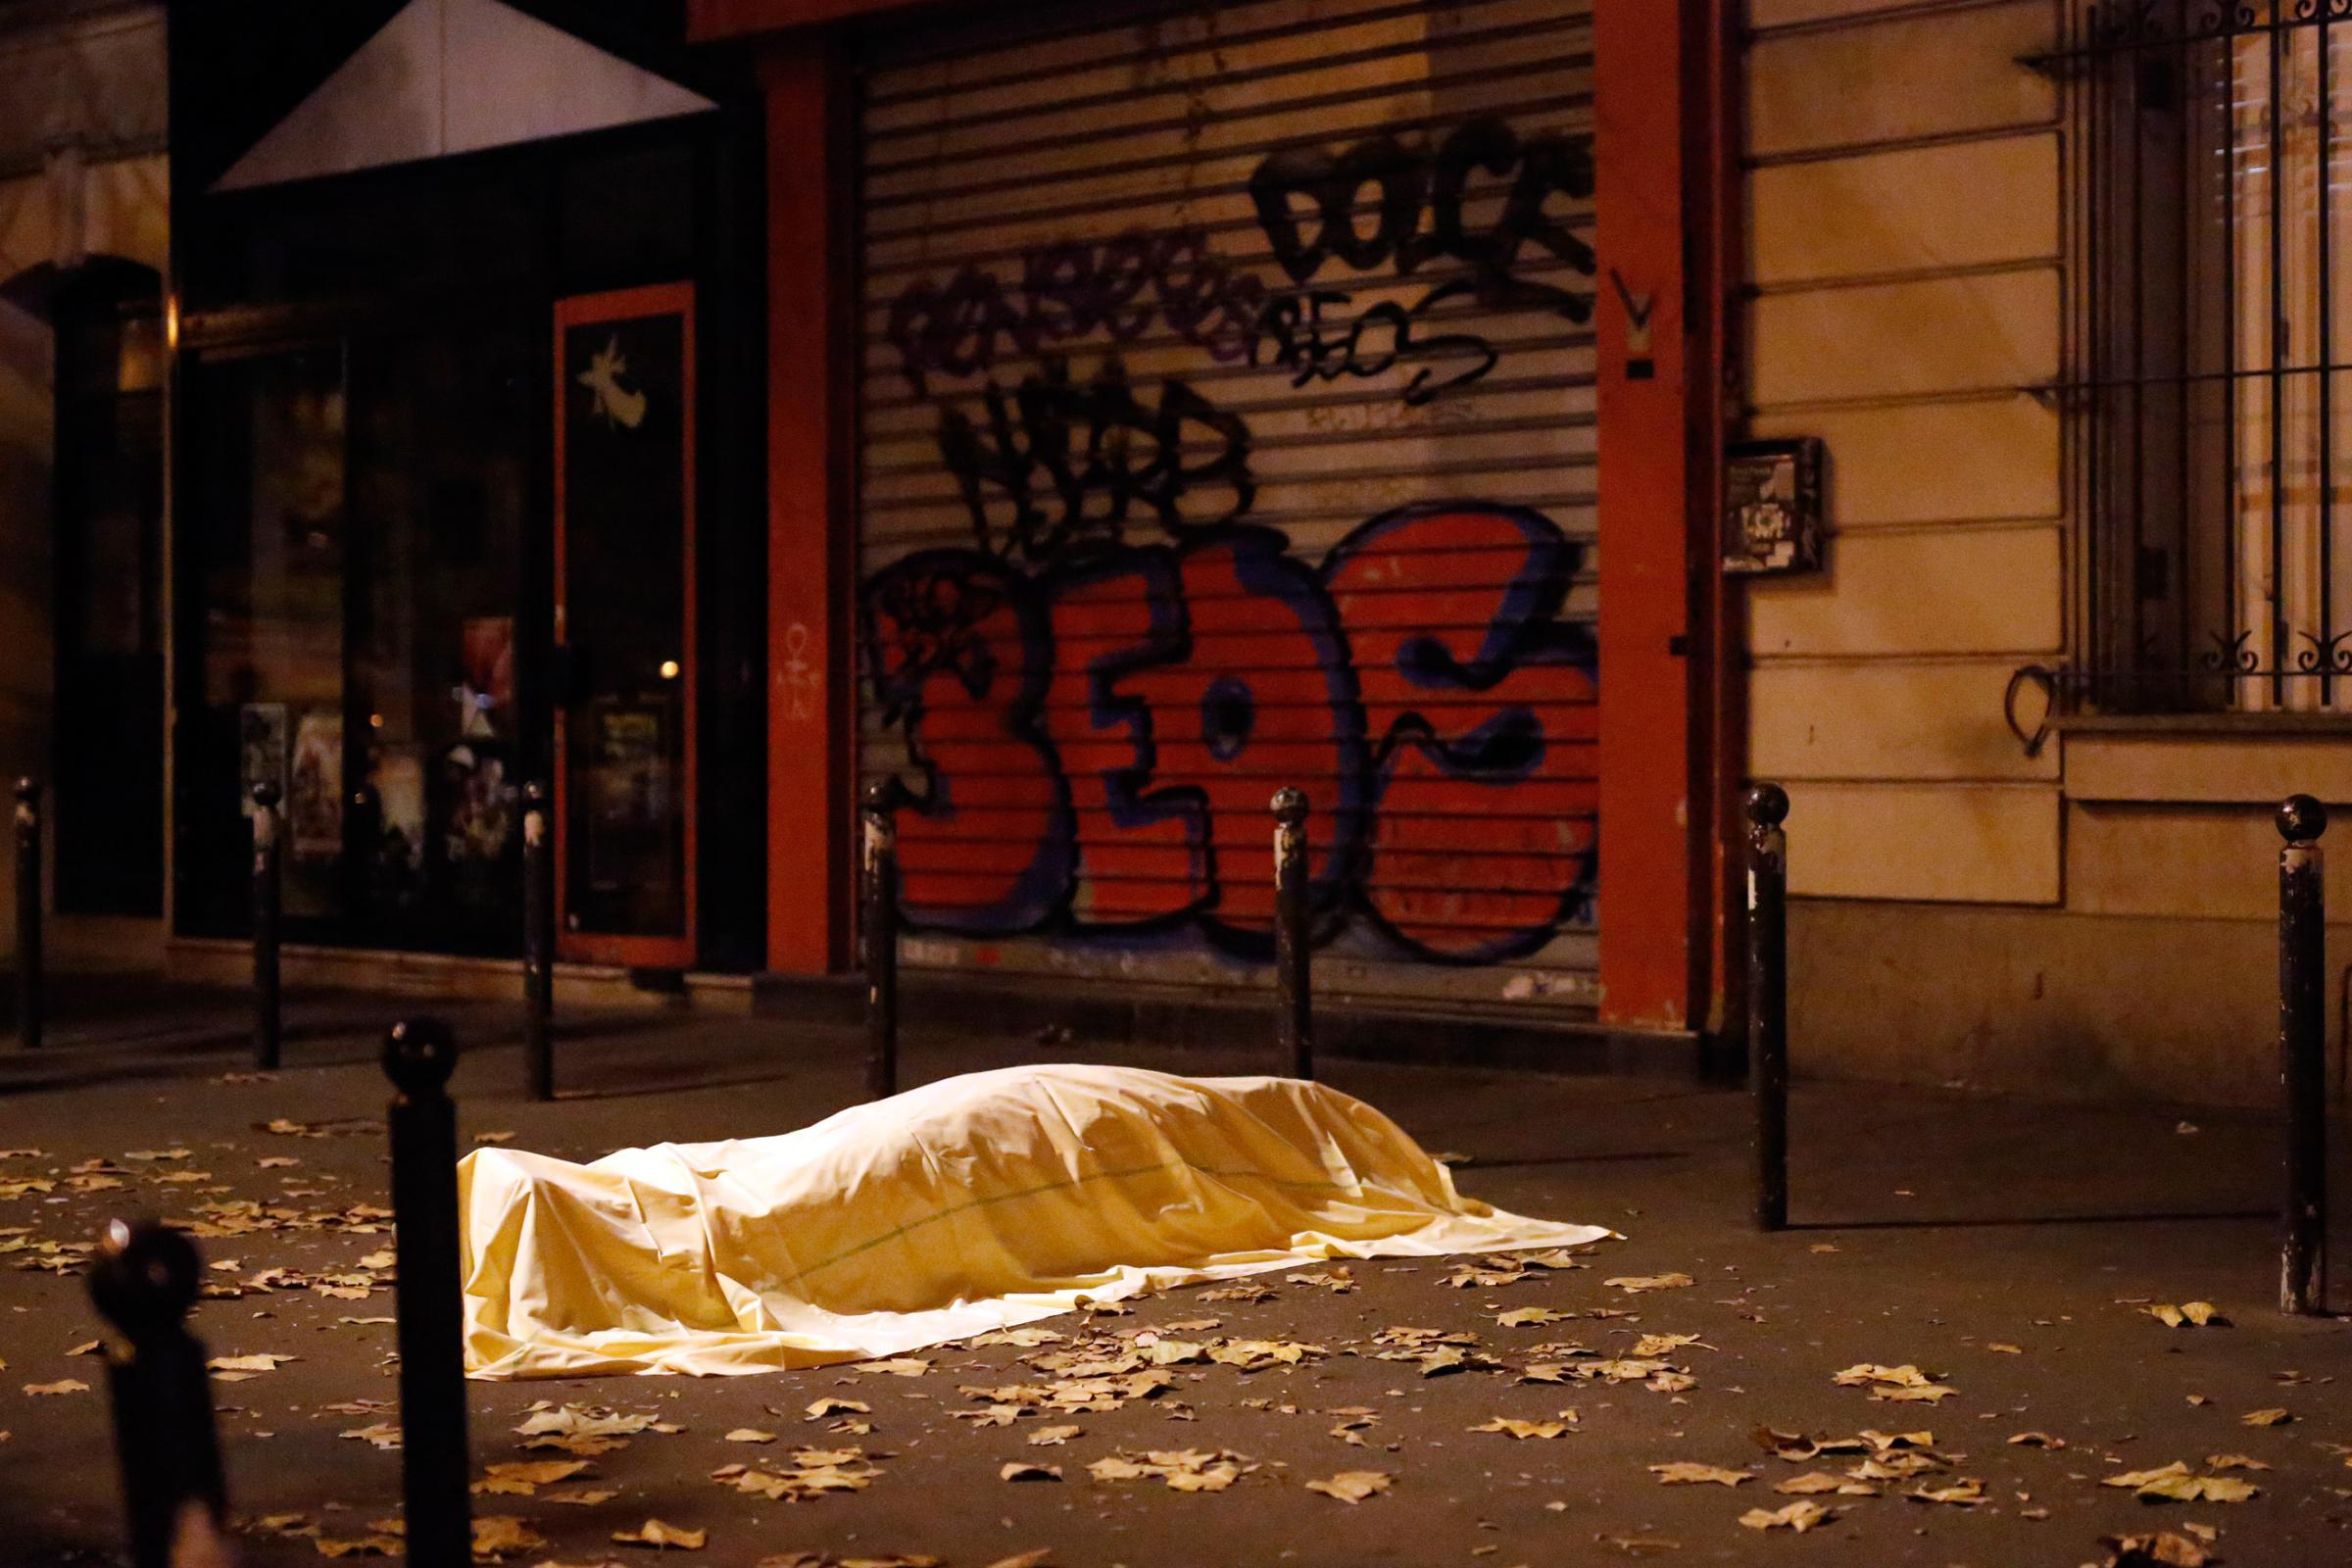 A victim under a blanket lays dead outside the Bataclan theater in Paris on Nov. 13, 2015.